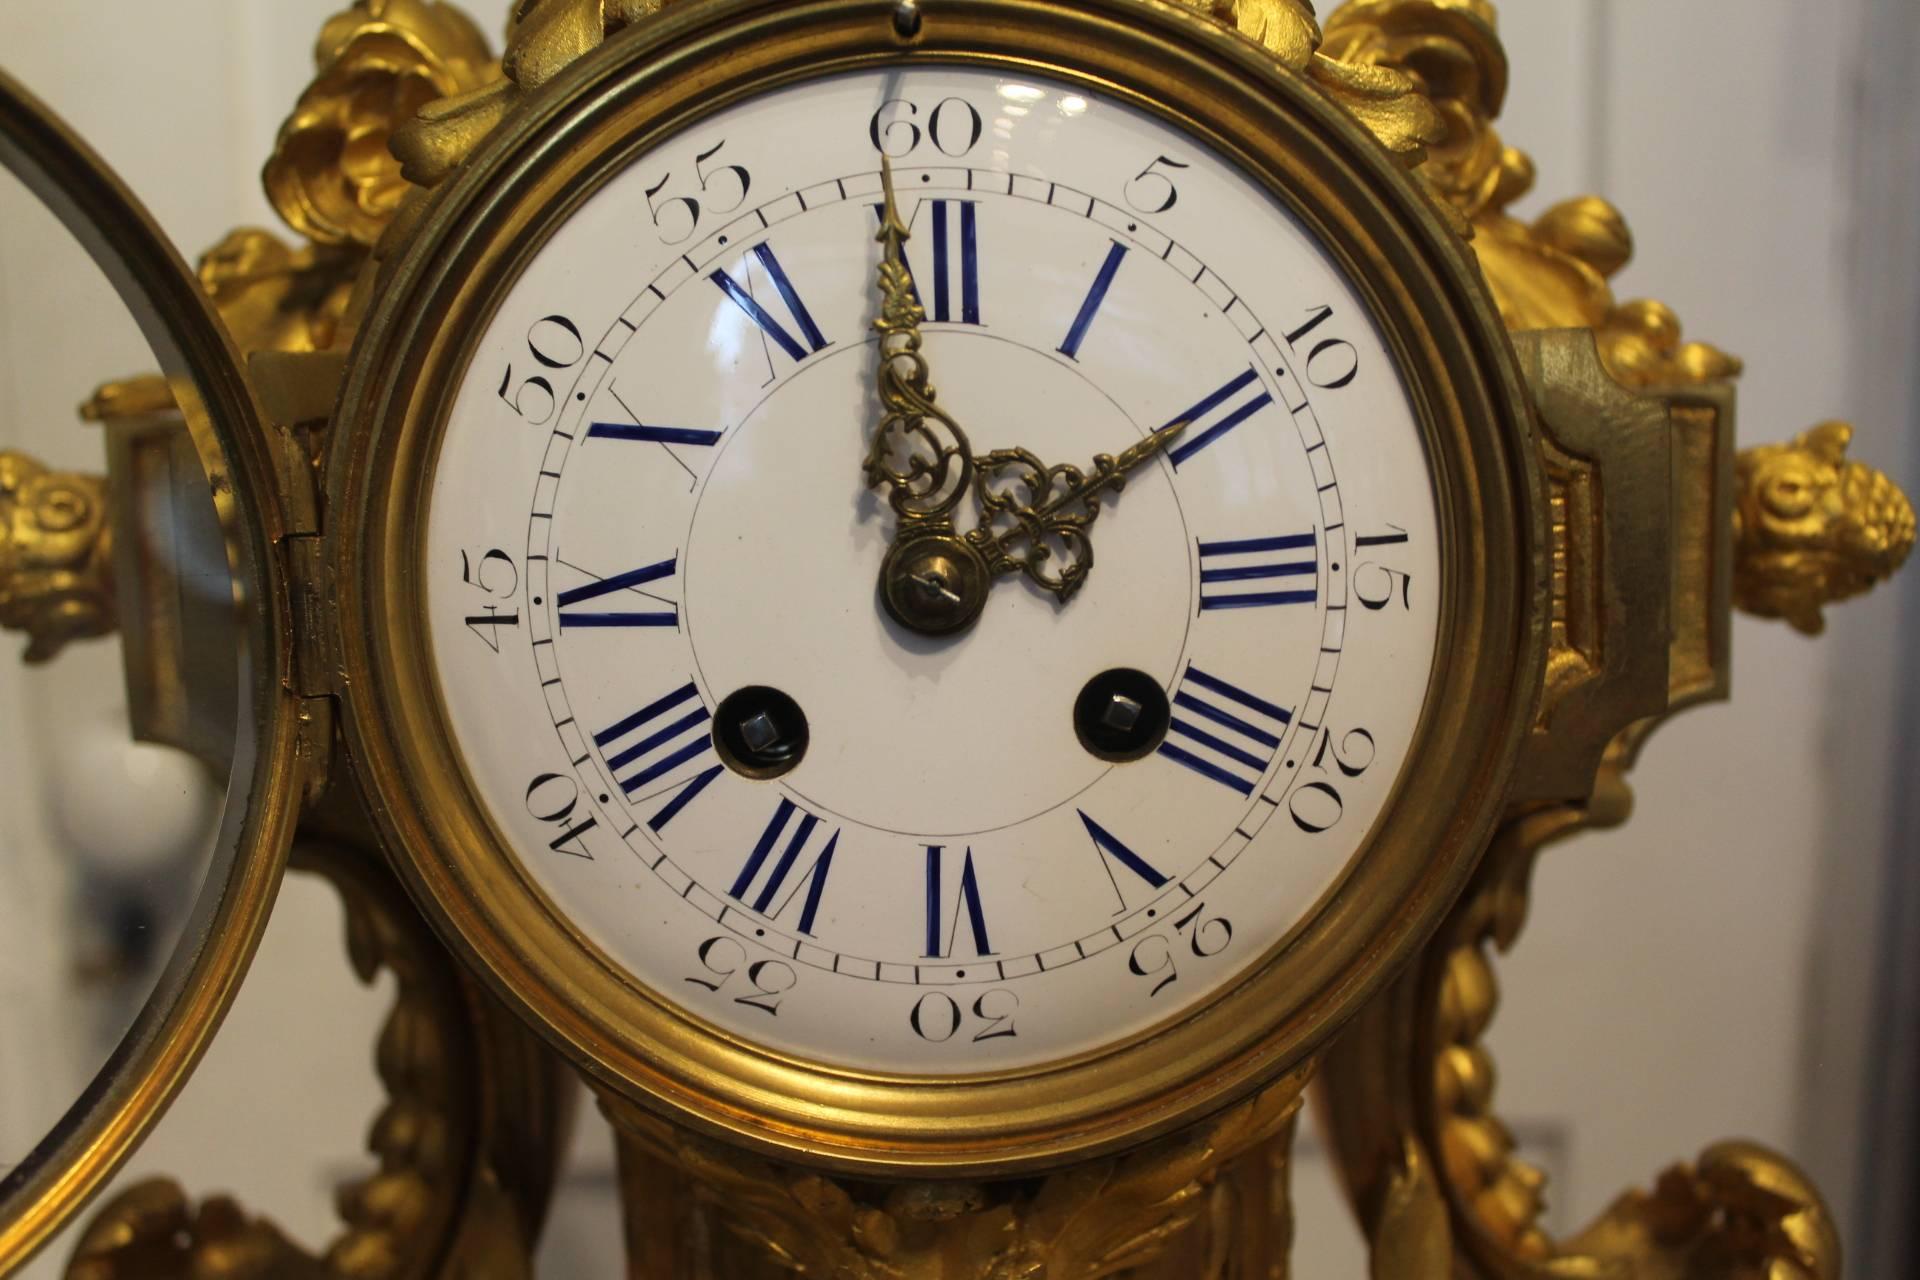 French ormolu clock, circa 1860

This beautiful clock has an eight-day movement de Paris, striking hours and half hours on a bell. The perfect white enamel dial showing both roman and Arabic numerals. The combination of the deep blue on the roman